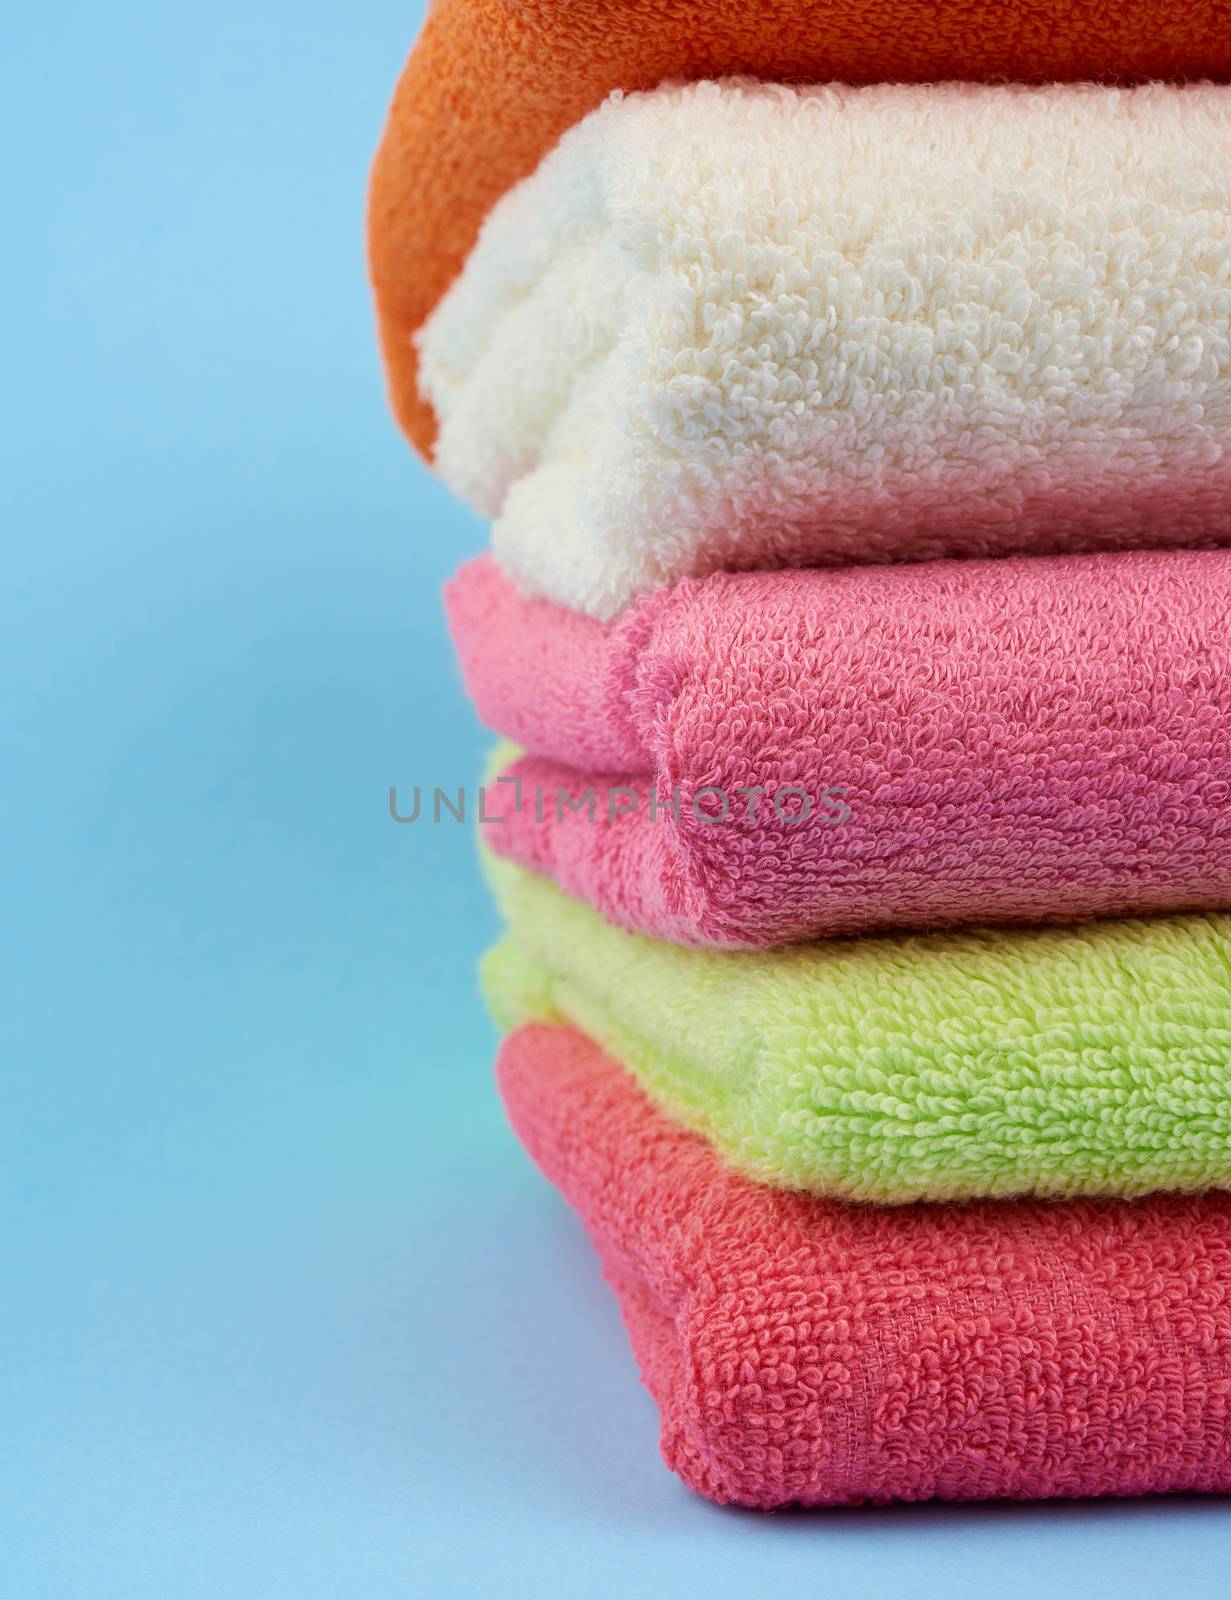 stack of colored cotton terry folded towels on a blue background by ndanko